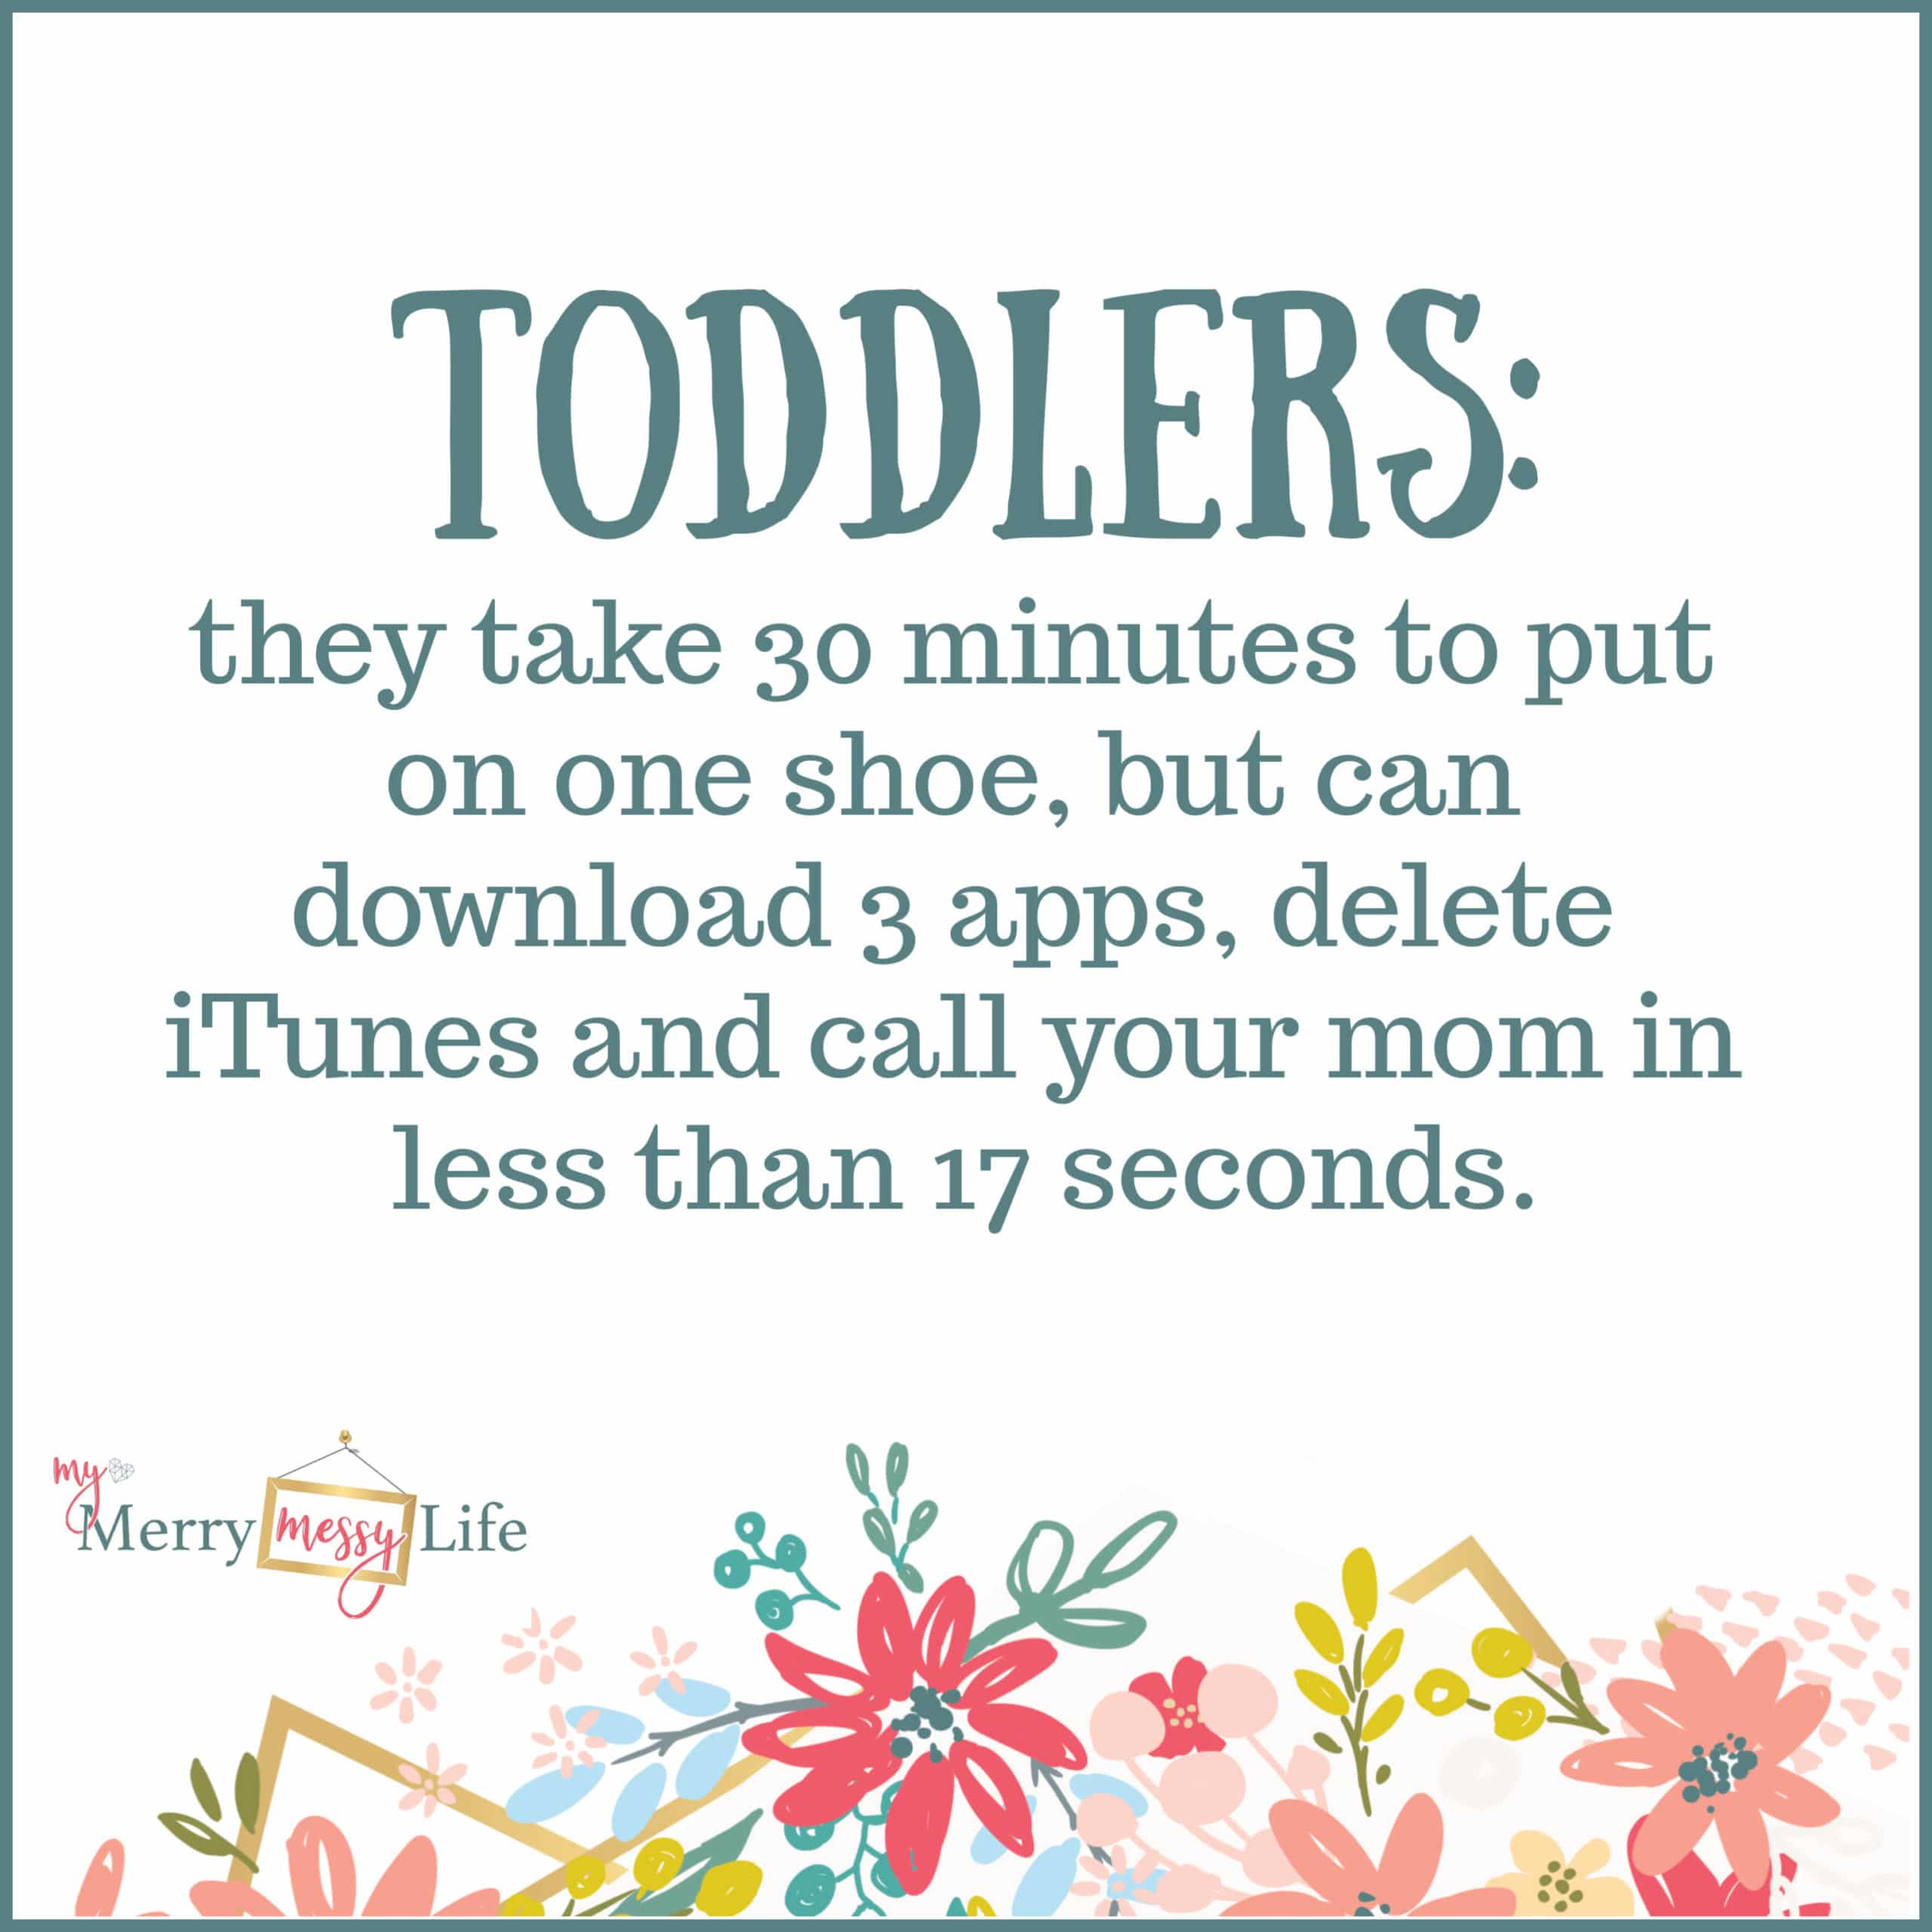 Toddlers: they take 30 minutes to put on one shoe, but can download 3 apps, delete iTunes and call your mom in less than 17 seconds. Funny Mom Memes about Toddlers